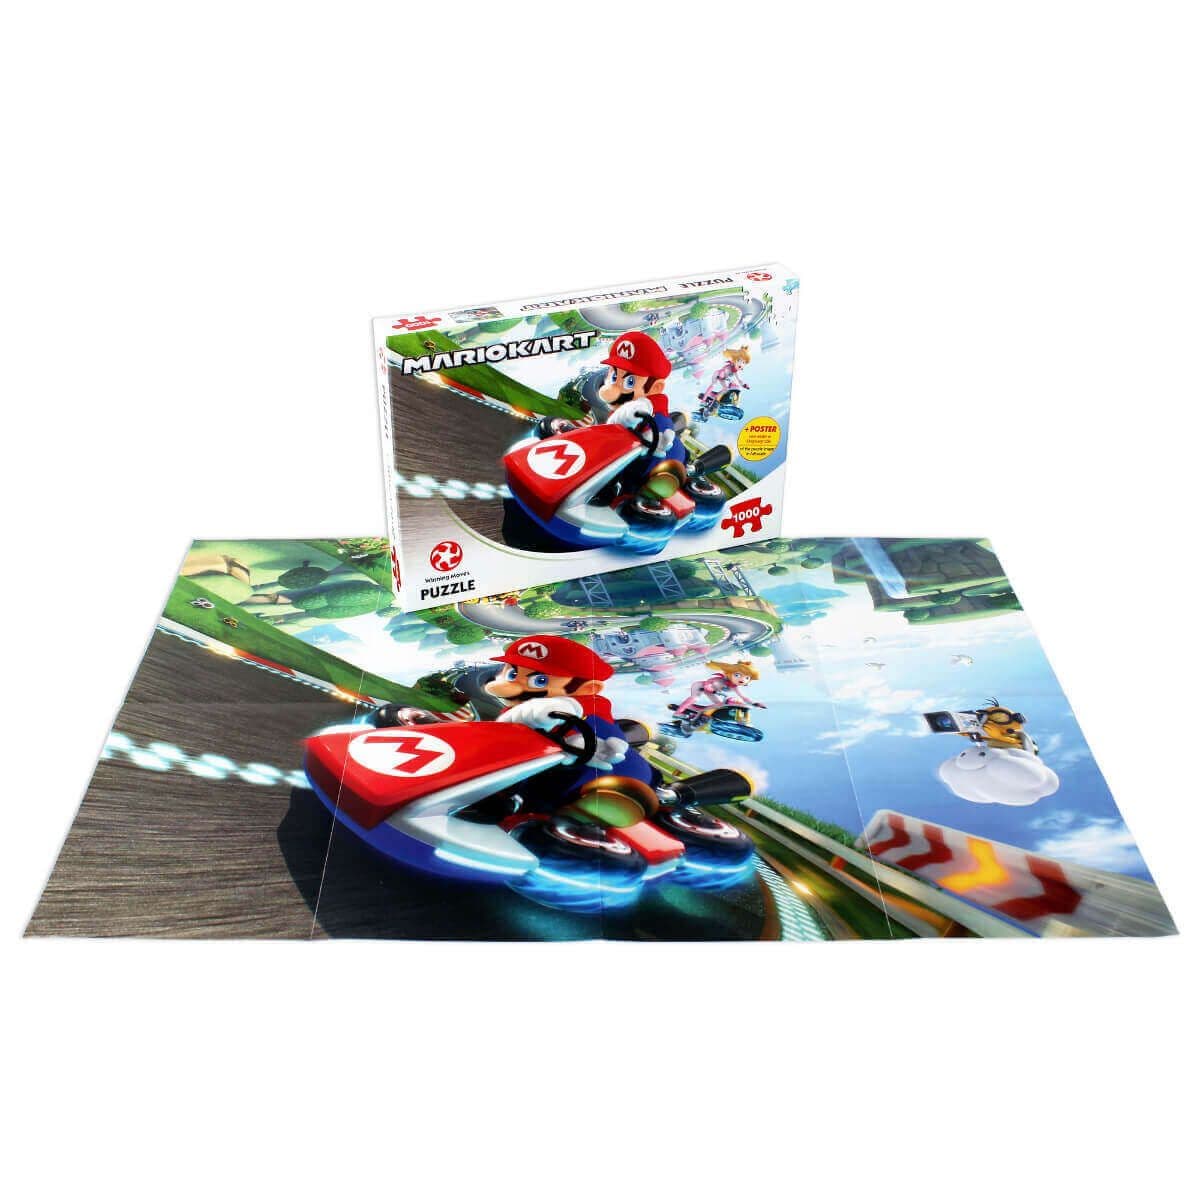 Winning Moves - Mario Kart Funracer - 1000 Piece Jigsaw Puzzle